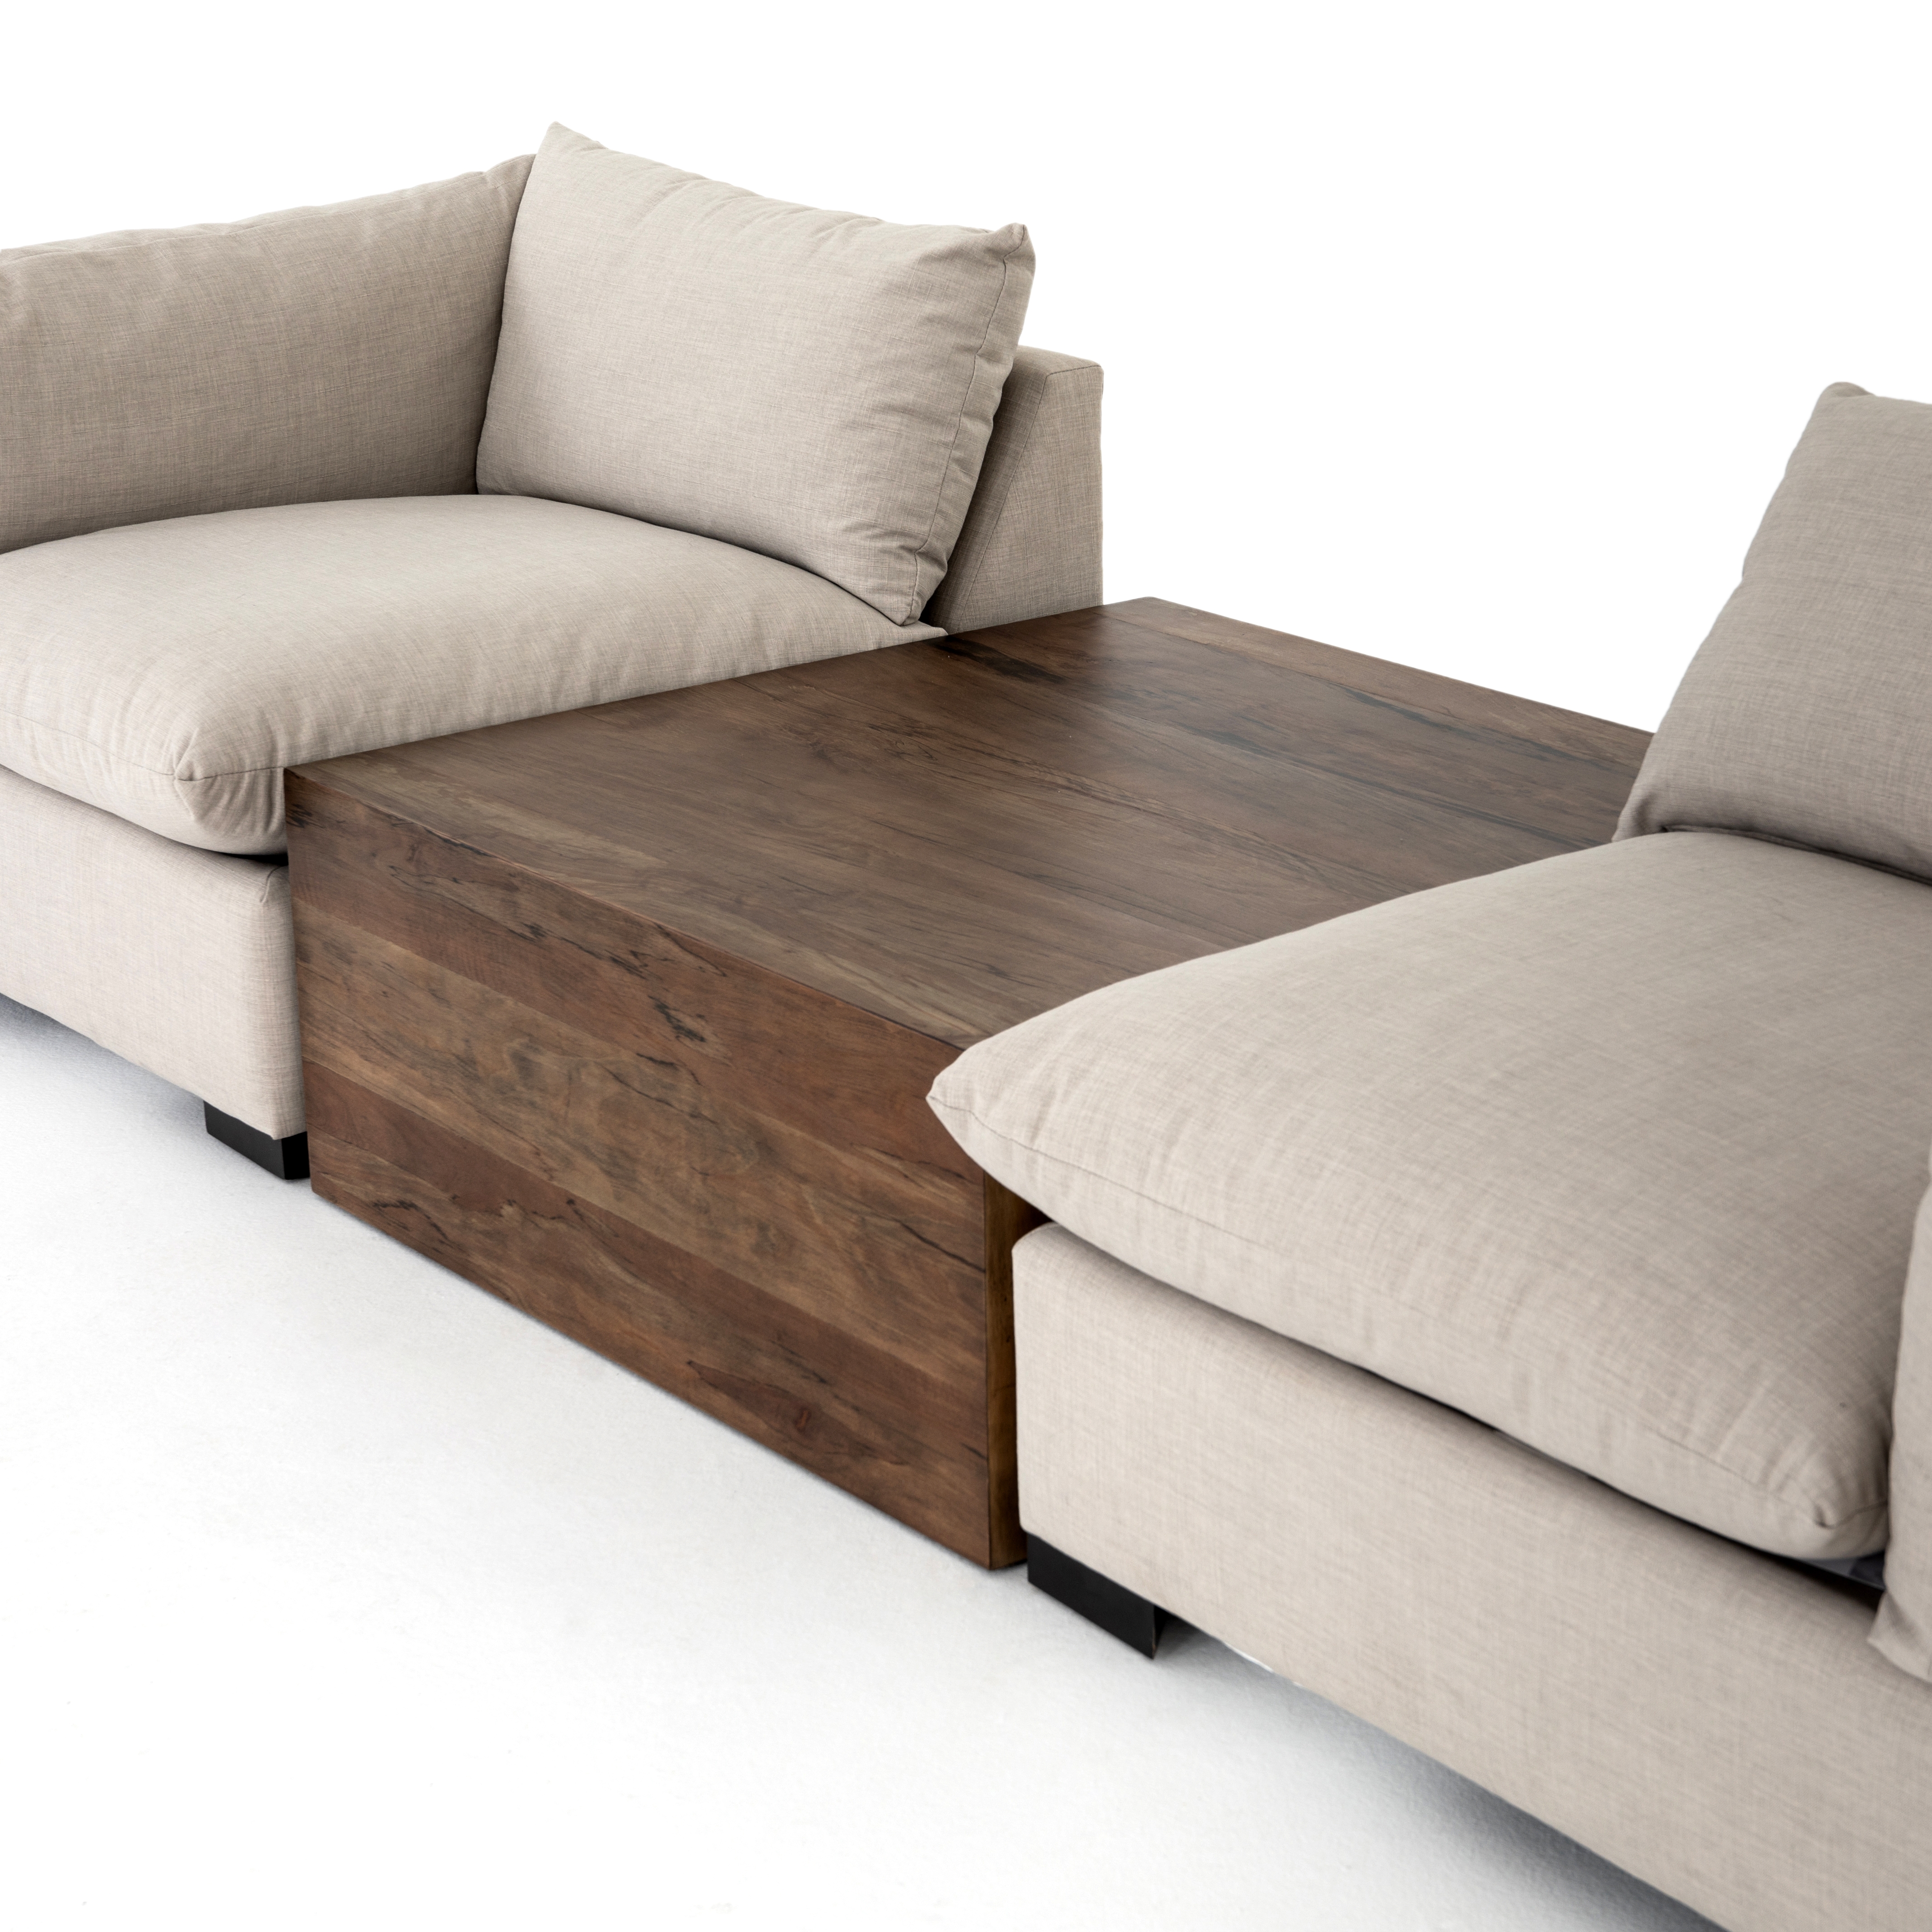 Zilpha Square Coffee Table - Image 1